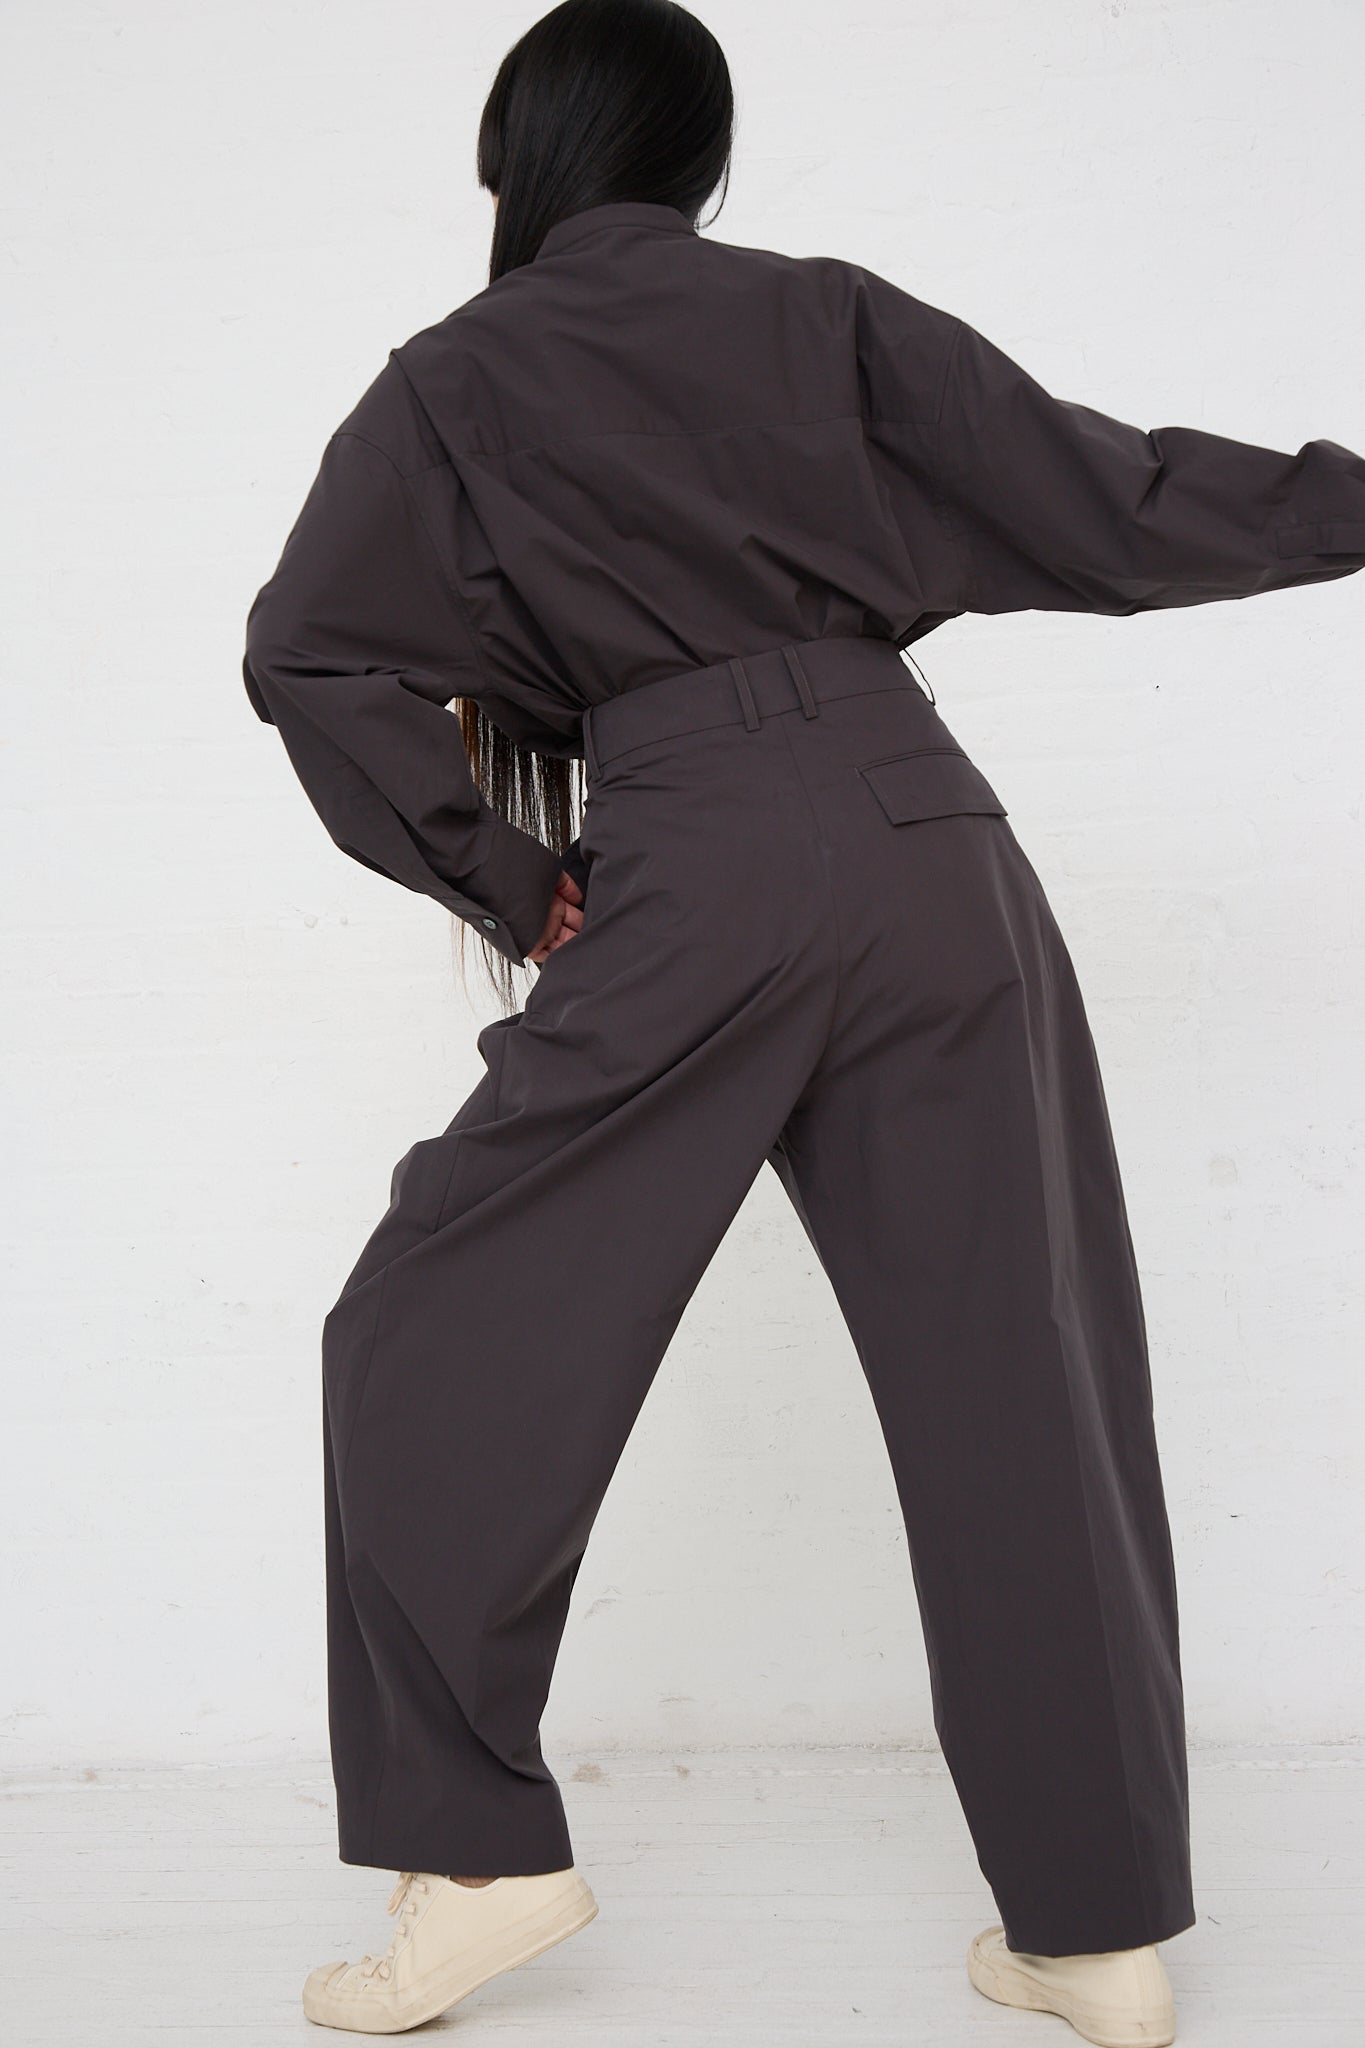 A woman in an Acuna Double Pleat Front Trouser in Asphalt by Studio Nicholson is standing in front of a white wall. Back view. Model's right arm is raised.